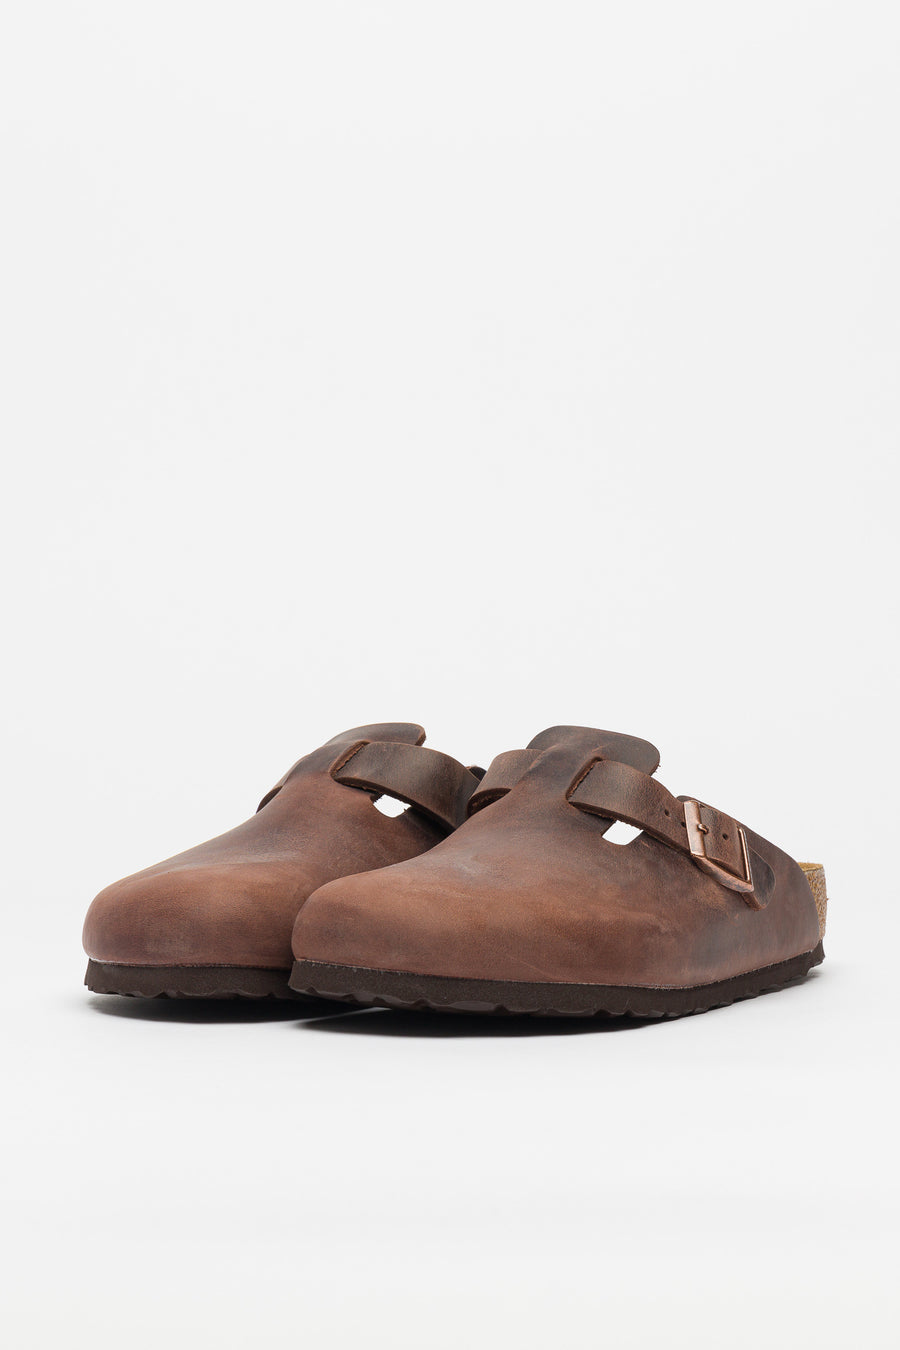 Boston Soft Footbed Oiled Leather in Habana